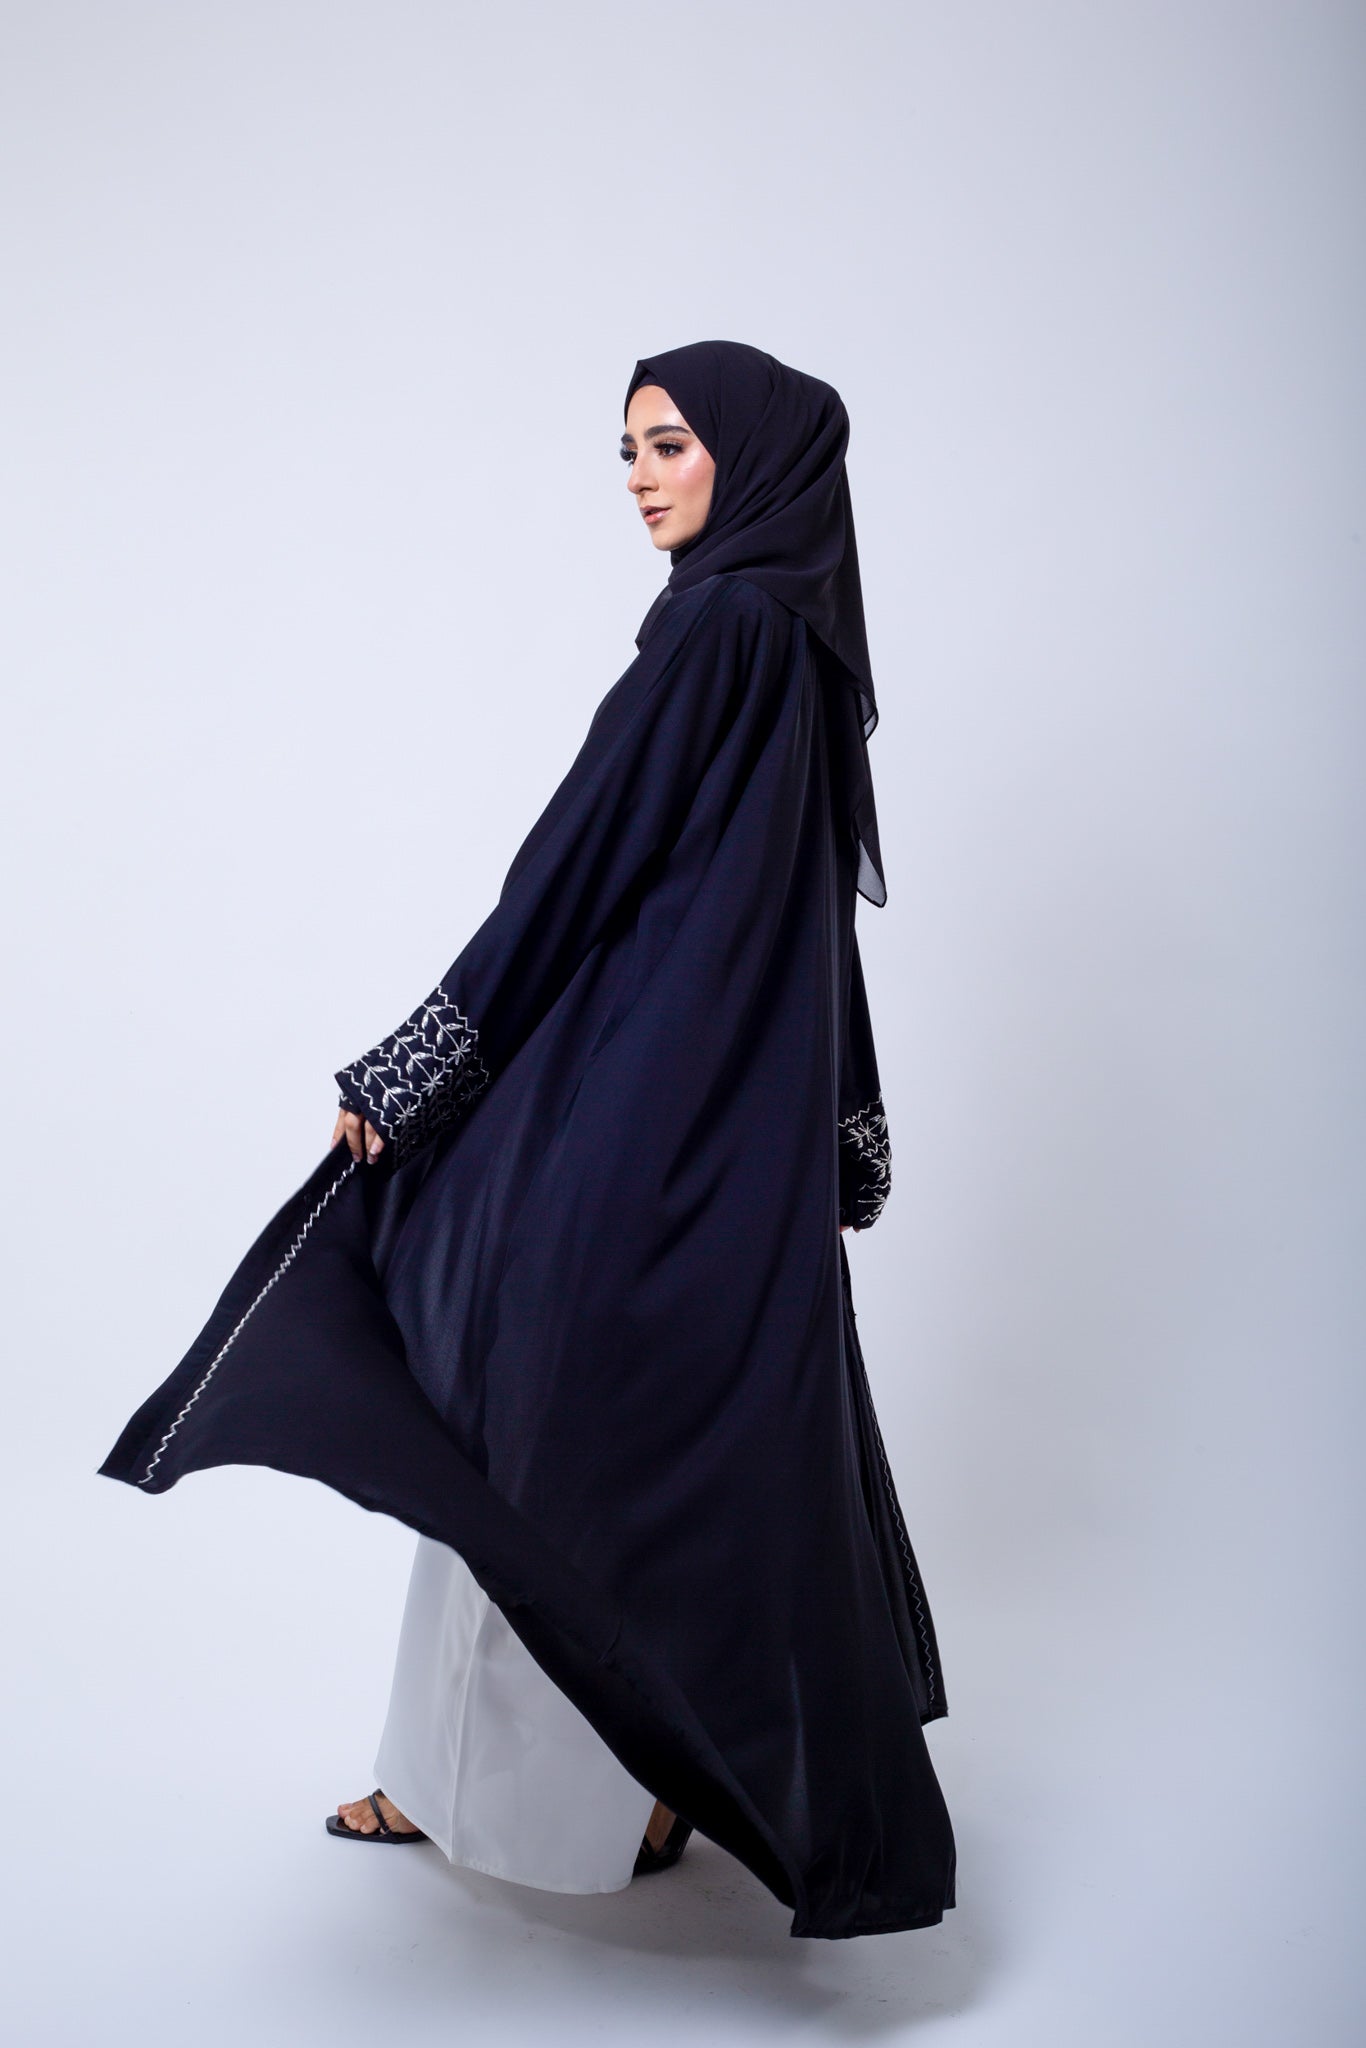 Black Open Abaya with Silver Embellishment